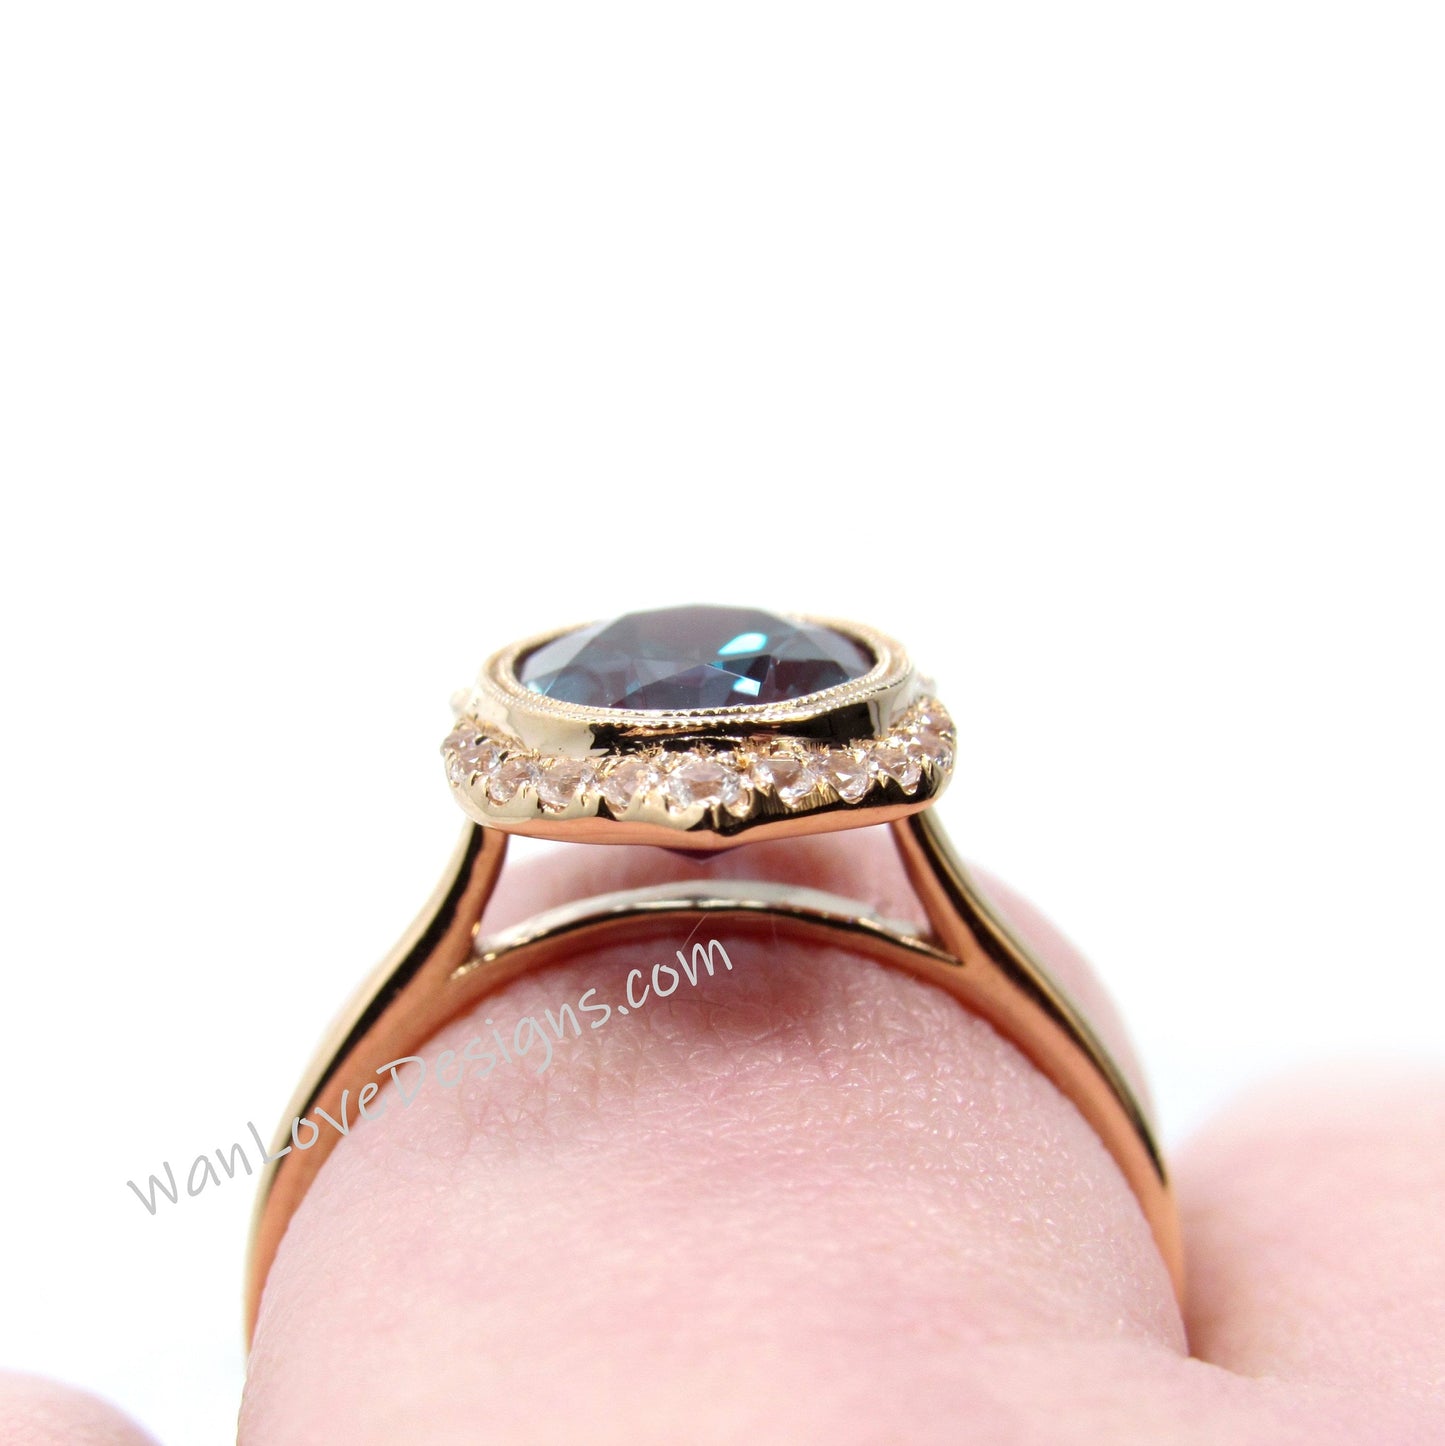 Oval Emerald Engagement Ring Antique Rose Gold Bezel Diamond Halo Ring Art Deco Delicate Wedding Bridal Ring Anniversary Promise Ring Wan Love Designs